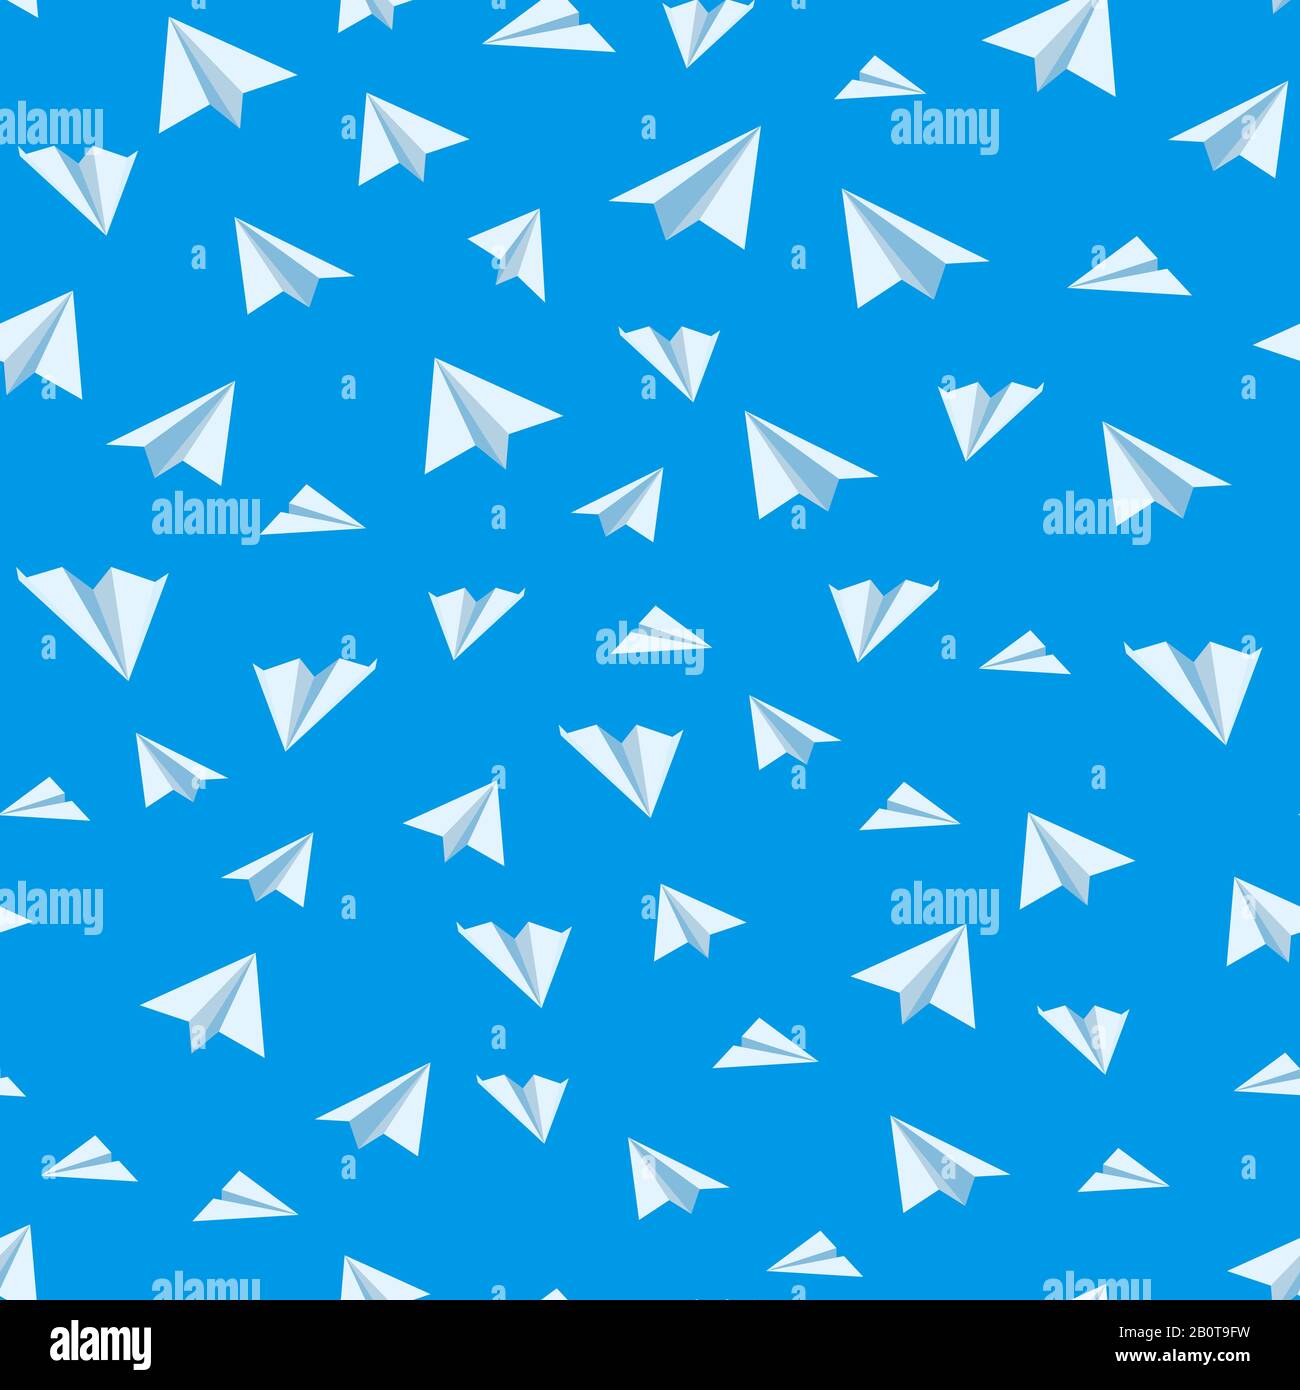 Origami paper airplane vector seamless background. Plane paper background, illustration of air paper toy plane Stock Vector